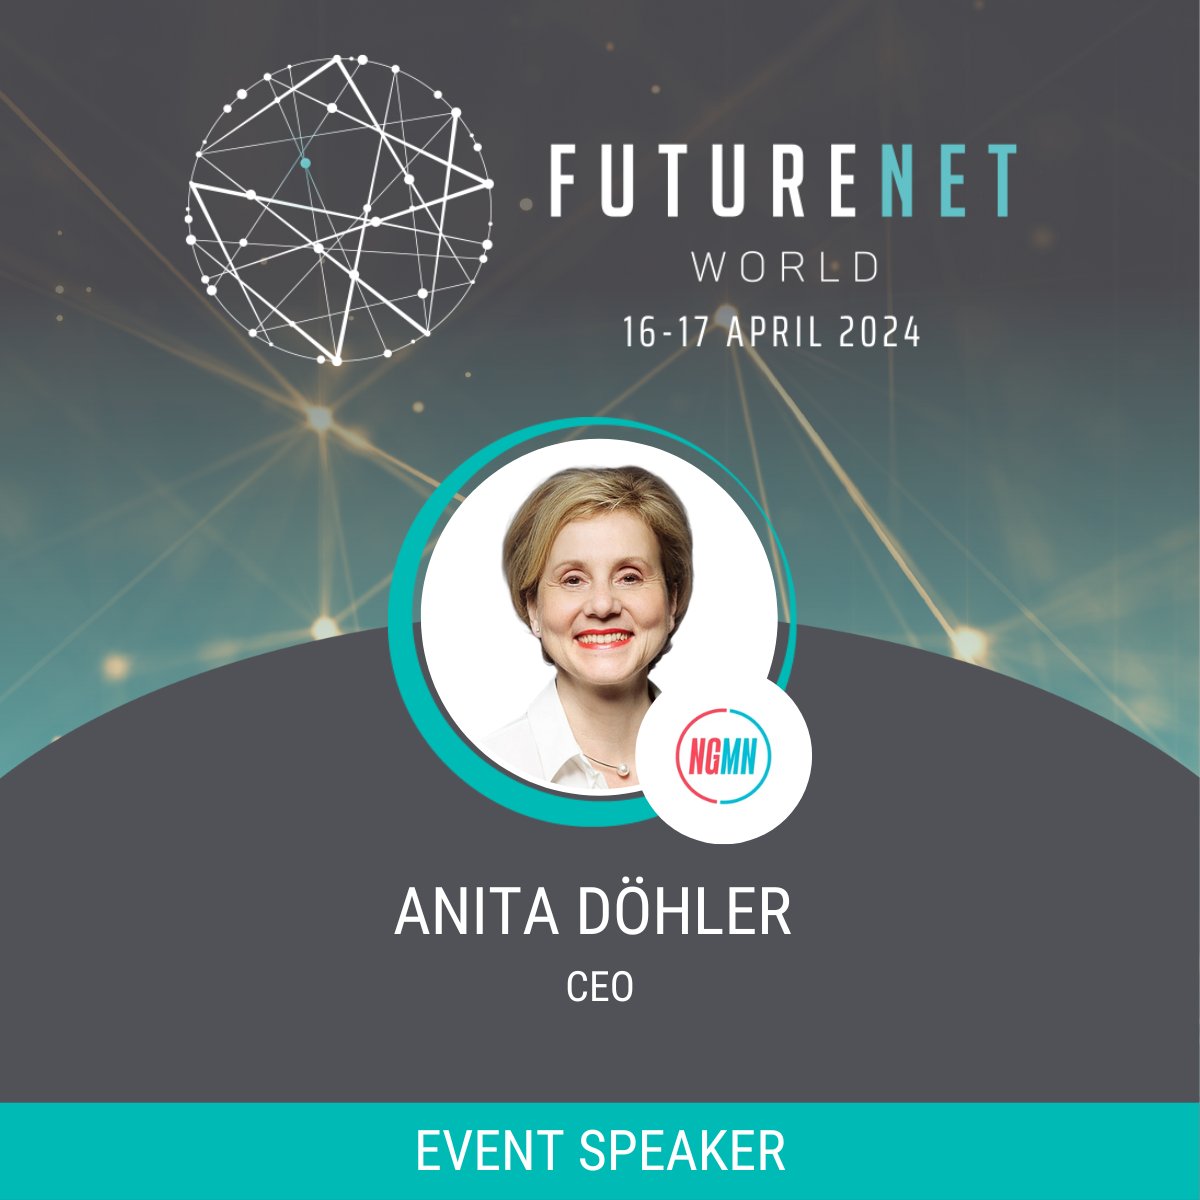 Next week, @AnitaDoehler, will explore NGMN’s views and recommendations on #GreenFutureNetworks during the panel discussion ‘Towards Net Zero: How to accelerate sustainability efforts efficiently’ at @FuturenetW on 17 April 14:15 GMT. Register here: bit.ly/493OQkh